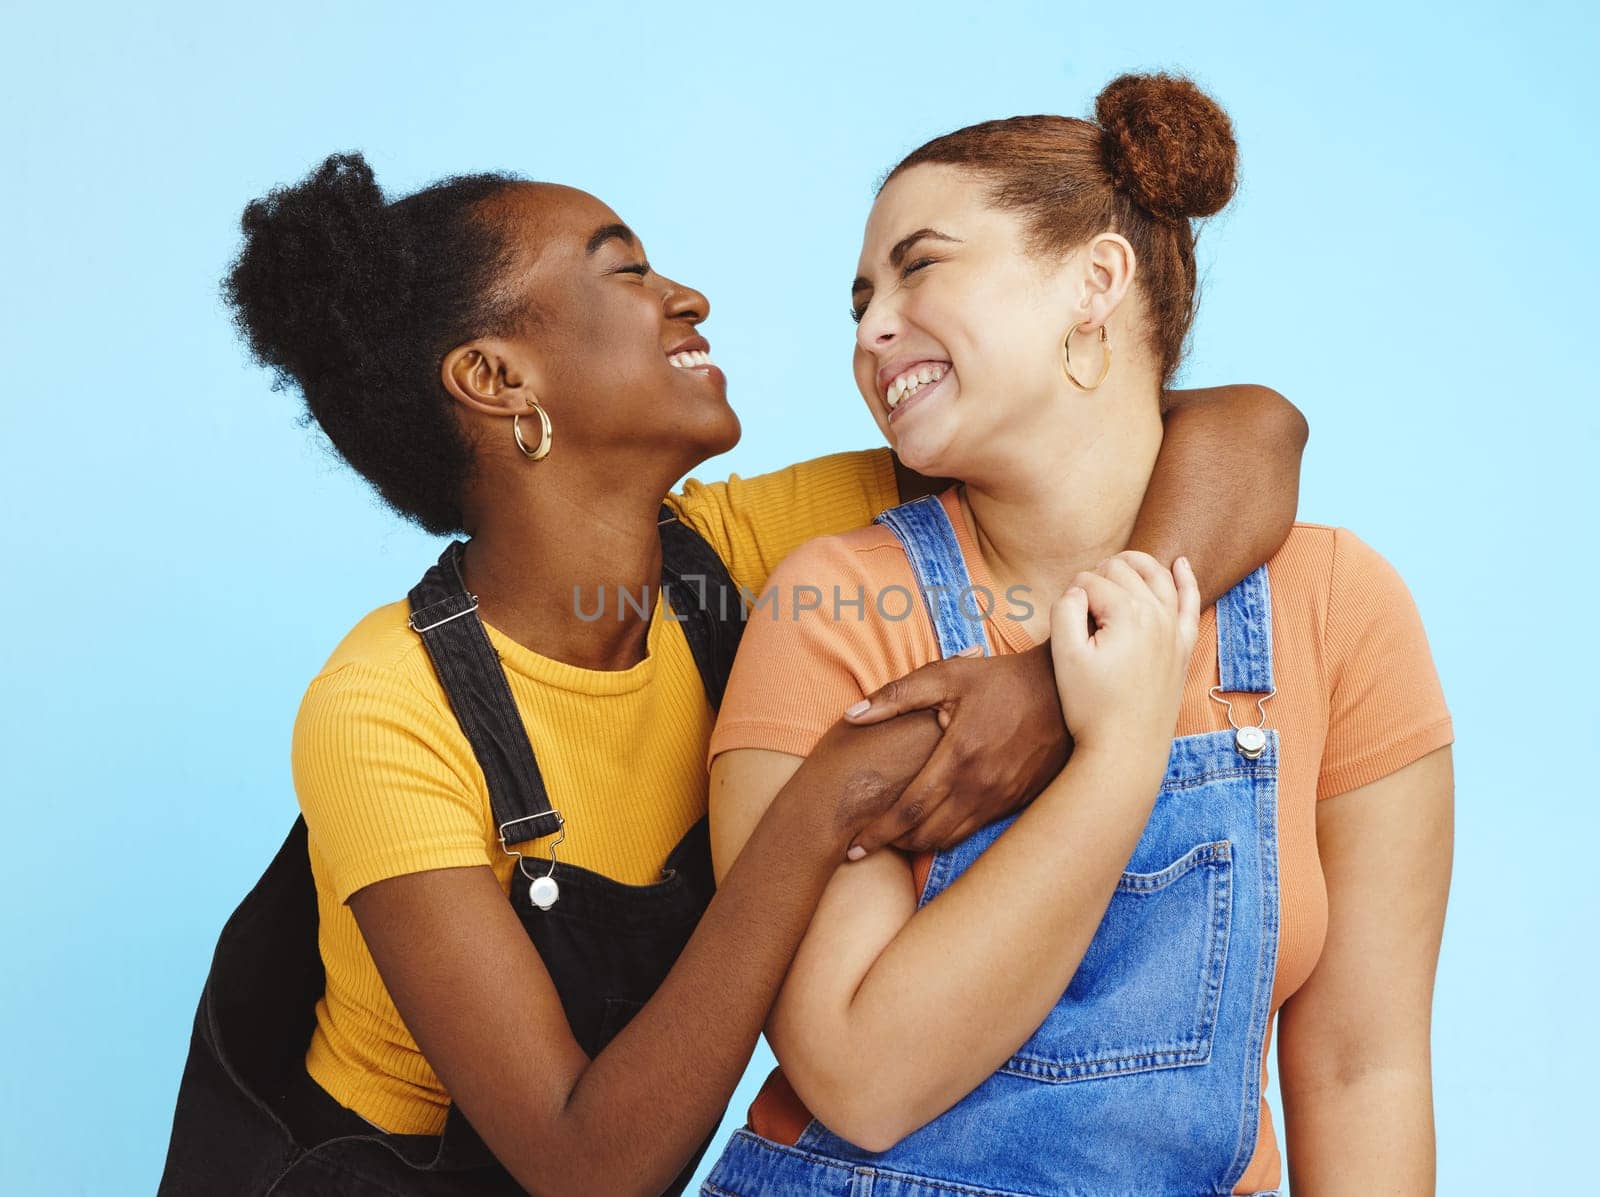 Hug, lesbian women and couple with happiness, young and gen z with lgbt, fashion and marketing with love against studio background. Happy lgbtq community, fun and freedom with style and pride.